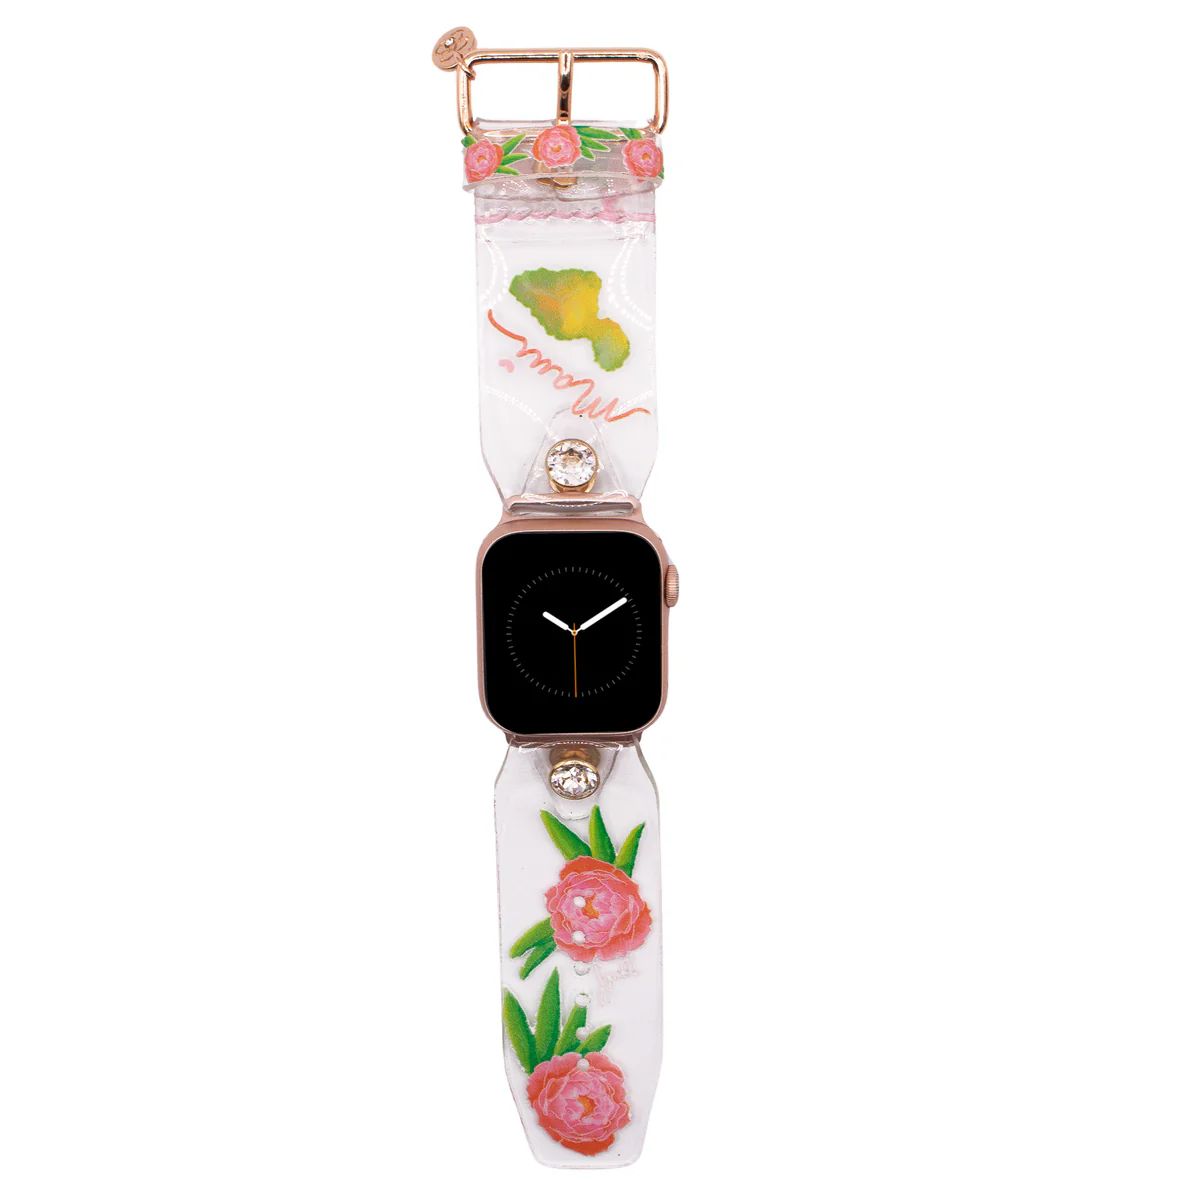 Limited Edition - "Maui Rose" Waterproof Sivella Watchband | Spark*l